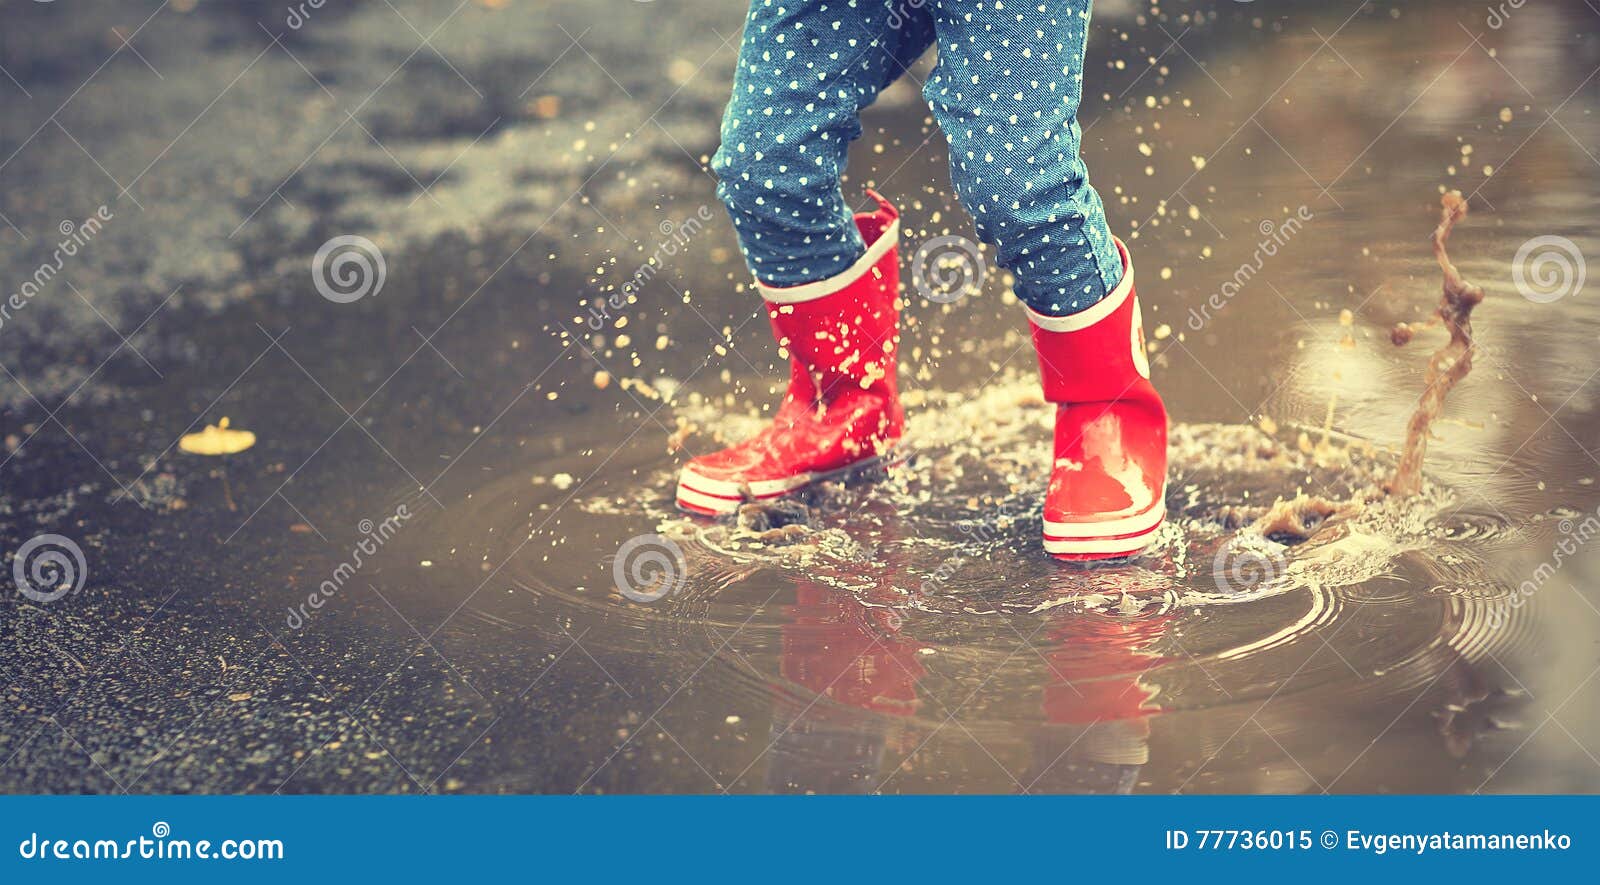 legs of child in red rubber boots jumping in autumn puddles